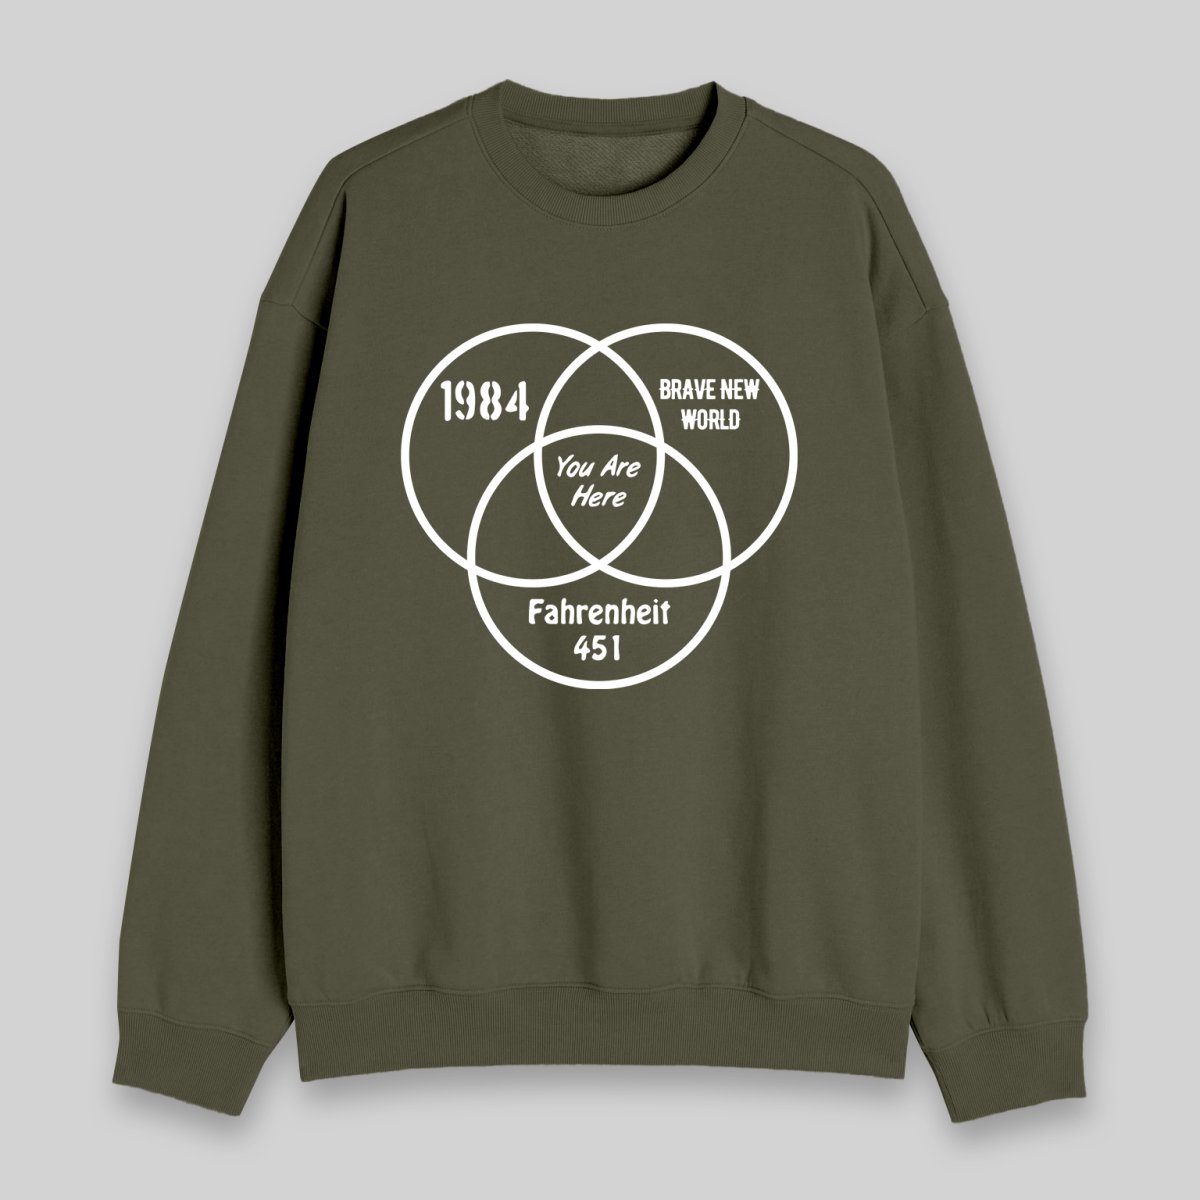 You Are Here Sweatshirt - Geeksoutfit